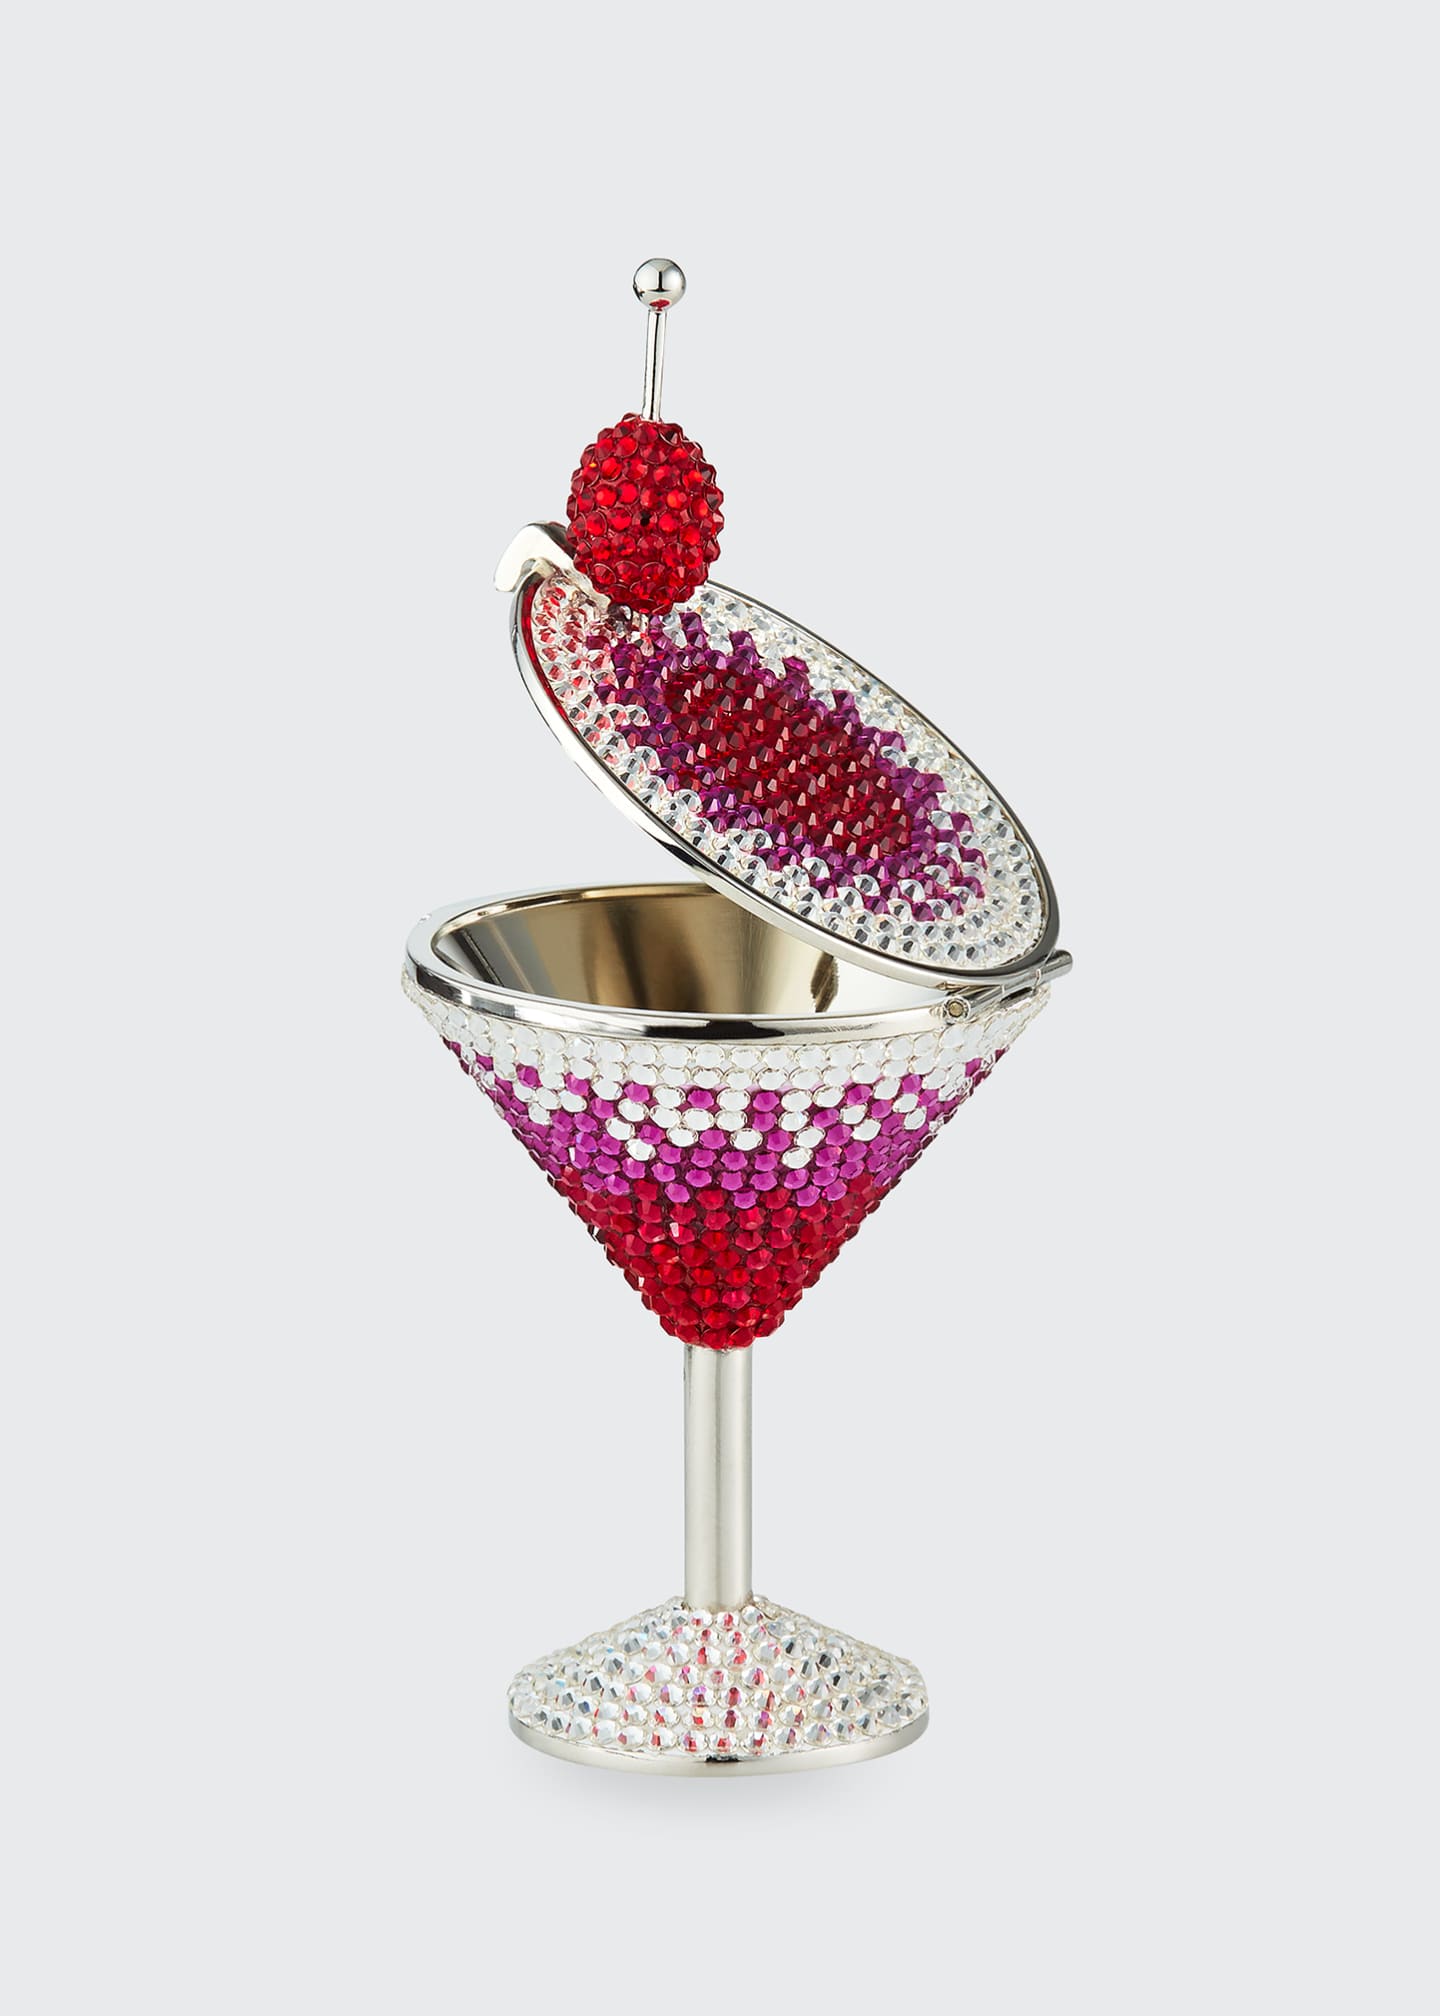 Kris Jenner pairs $6K bejeweled martini purse with the real thing